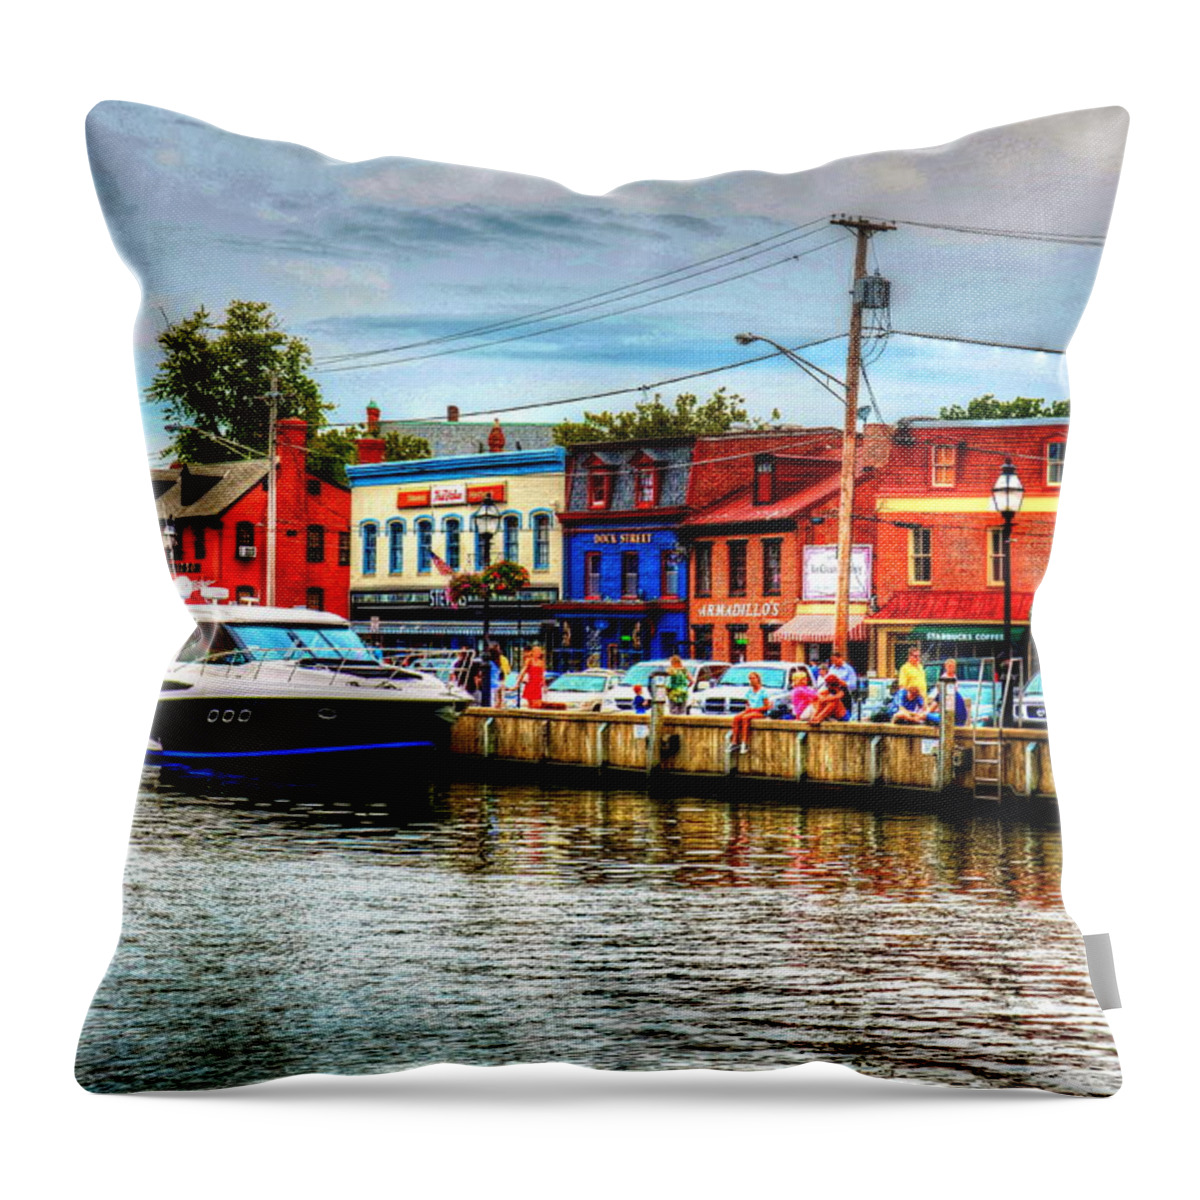 Annapolis Throw Pillow featuring the photograph Annapolis City Docks by Debbi Granruth